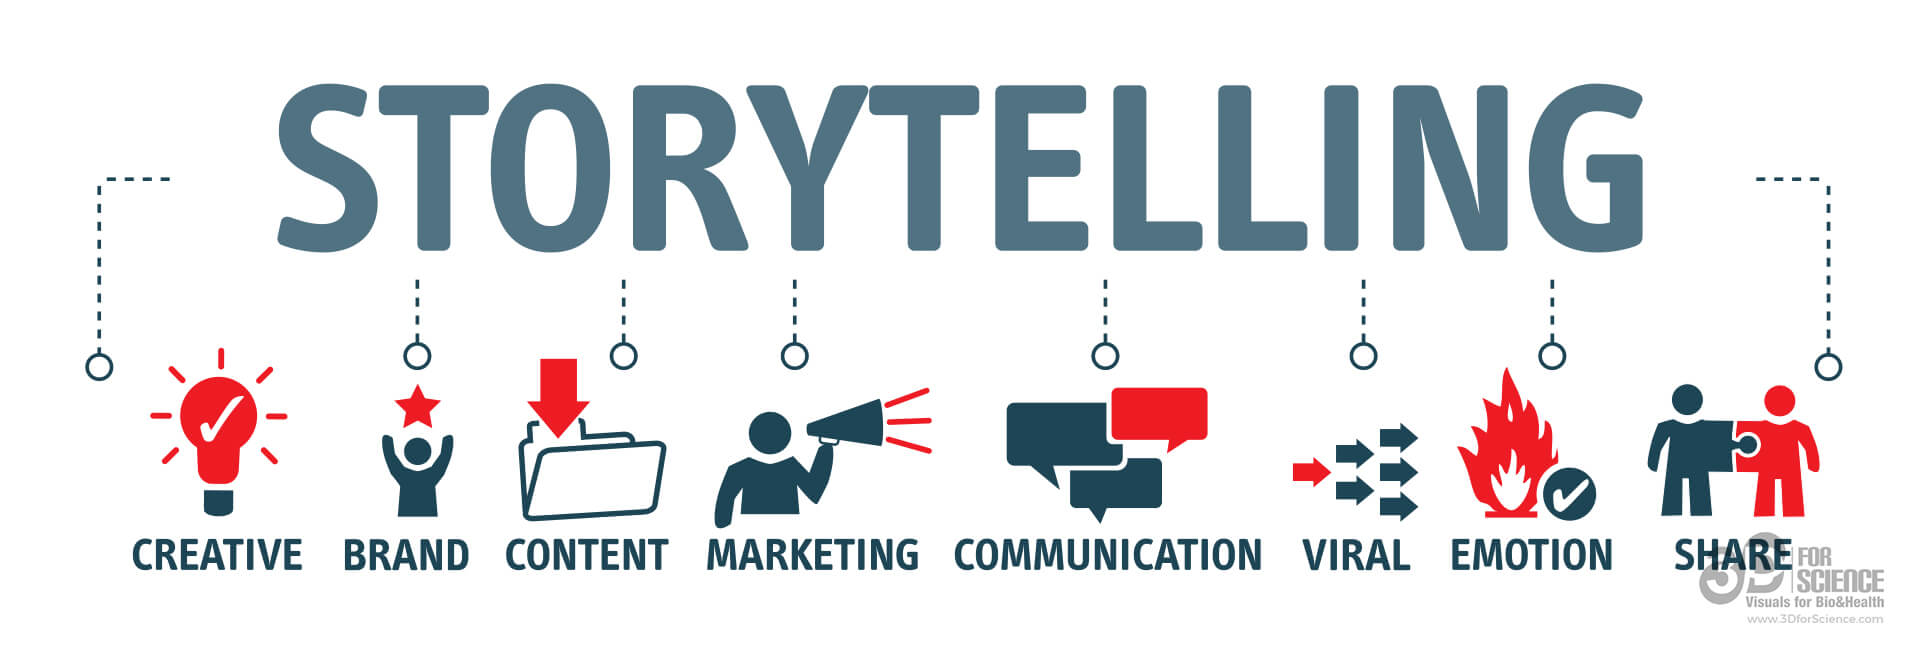 infographics about storytelling in marketing